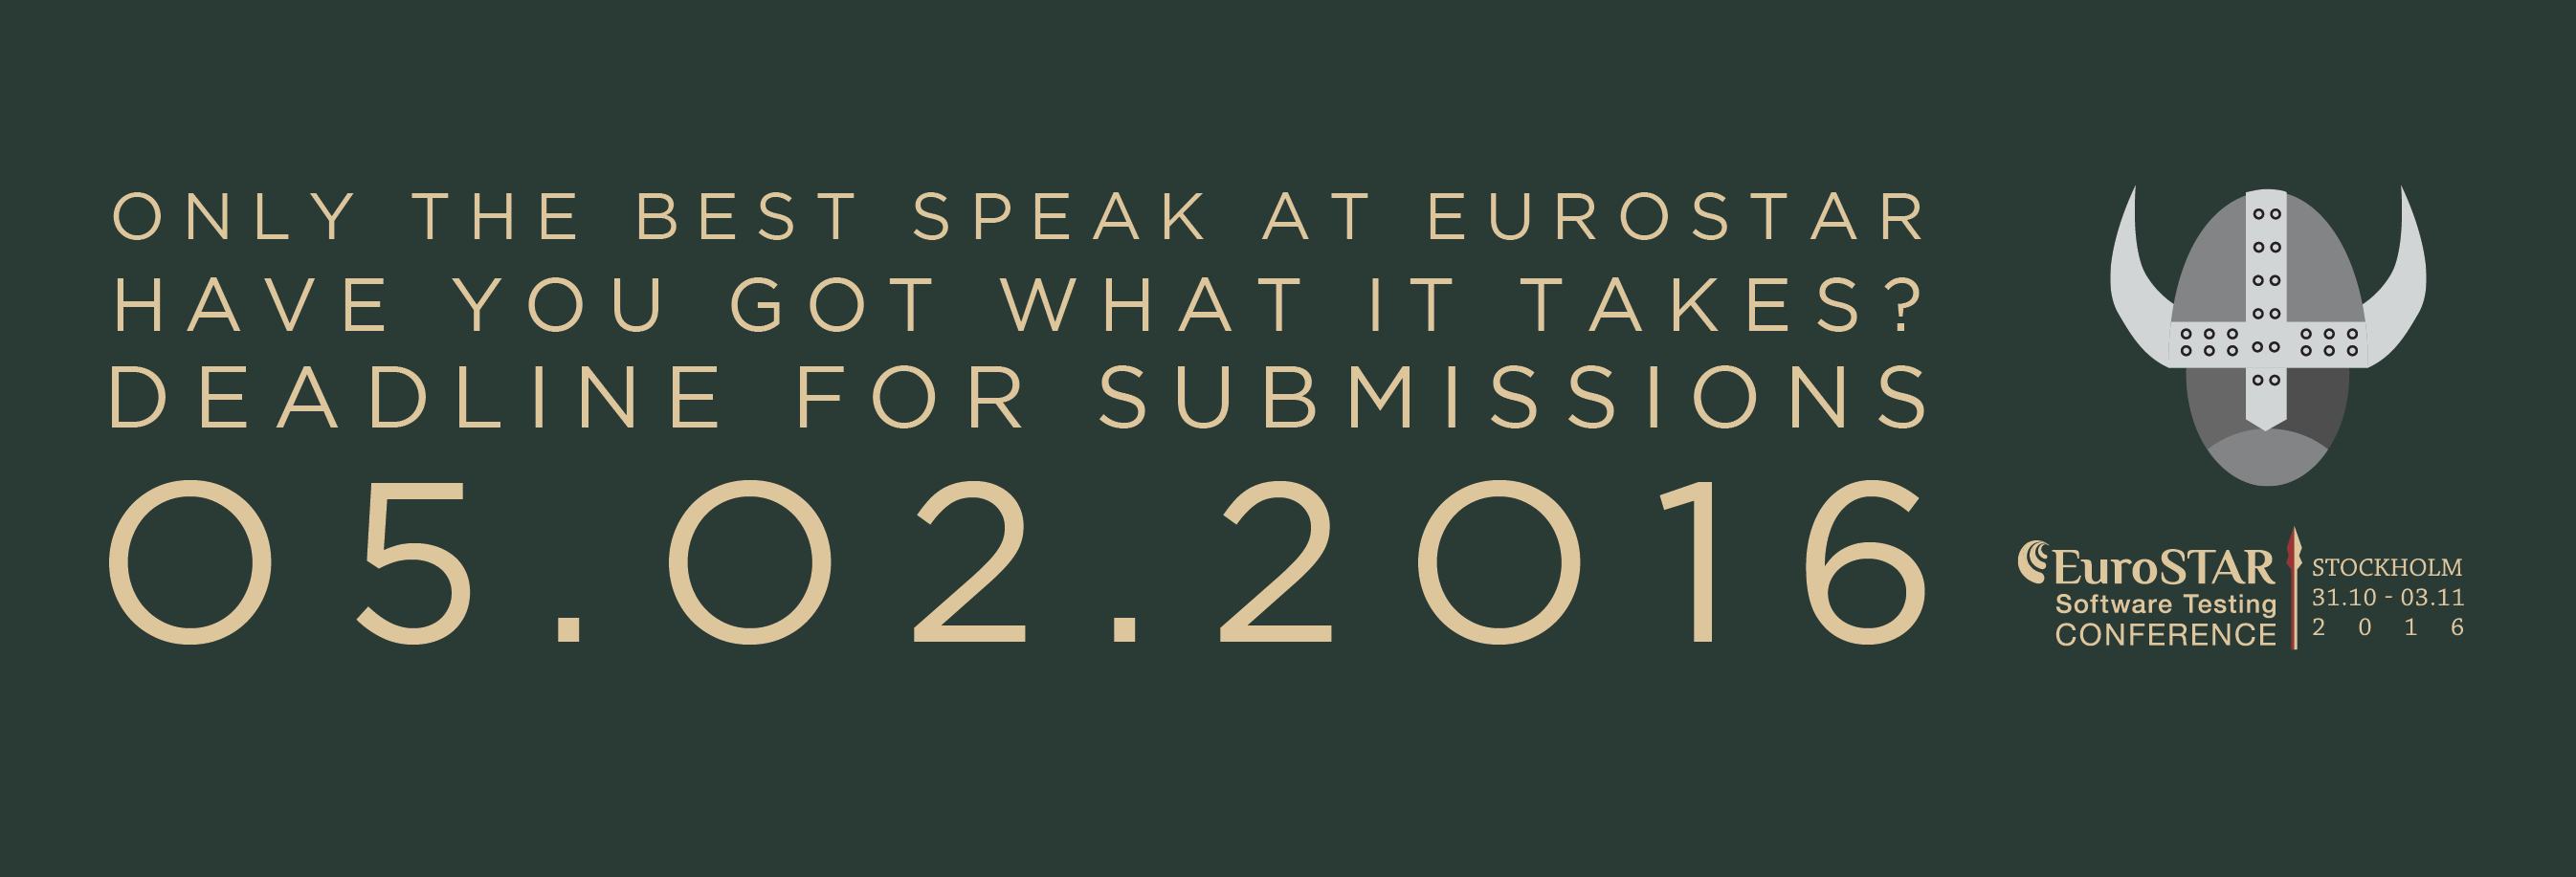 EuroStar Conference Call For Paper